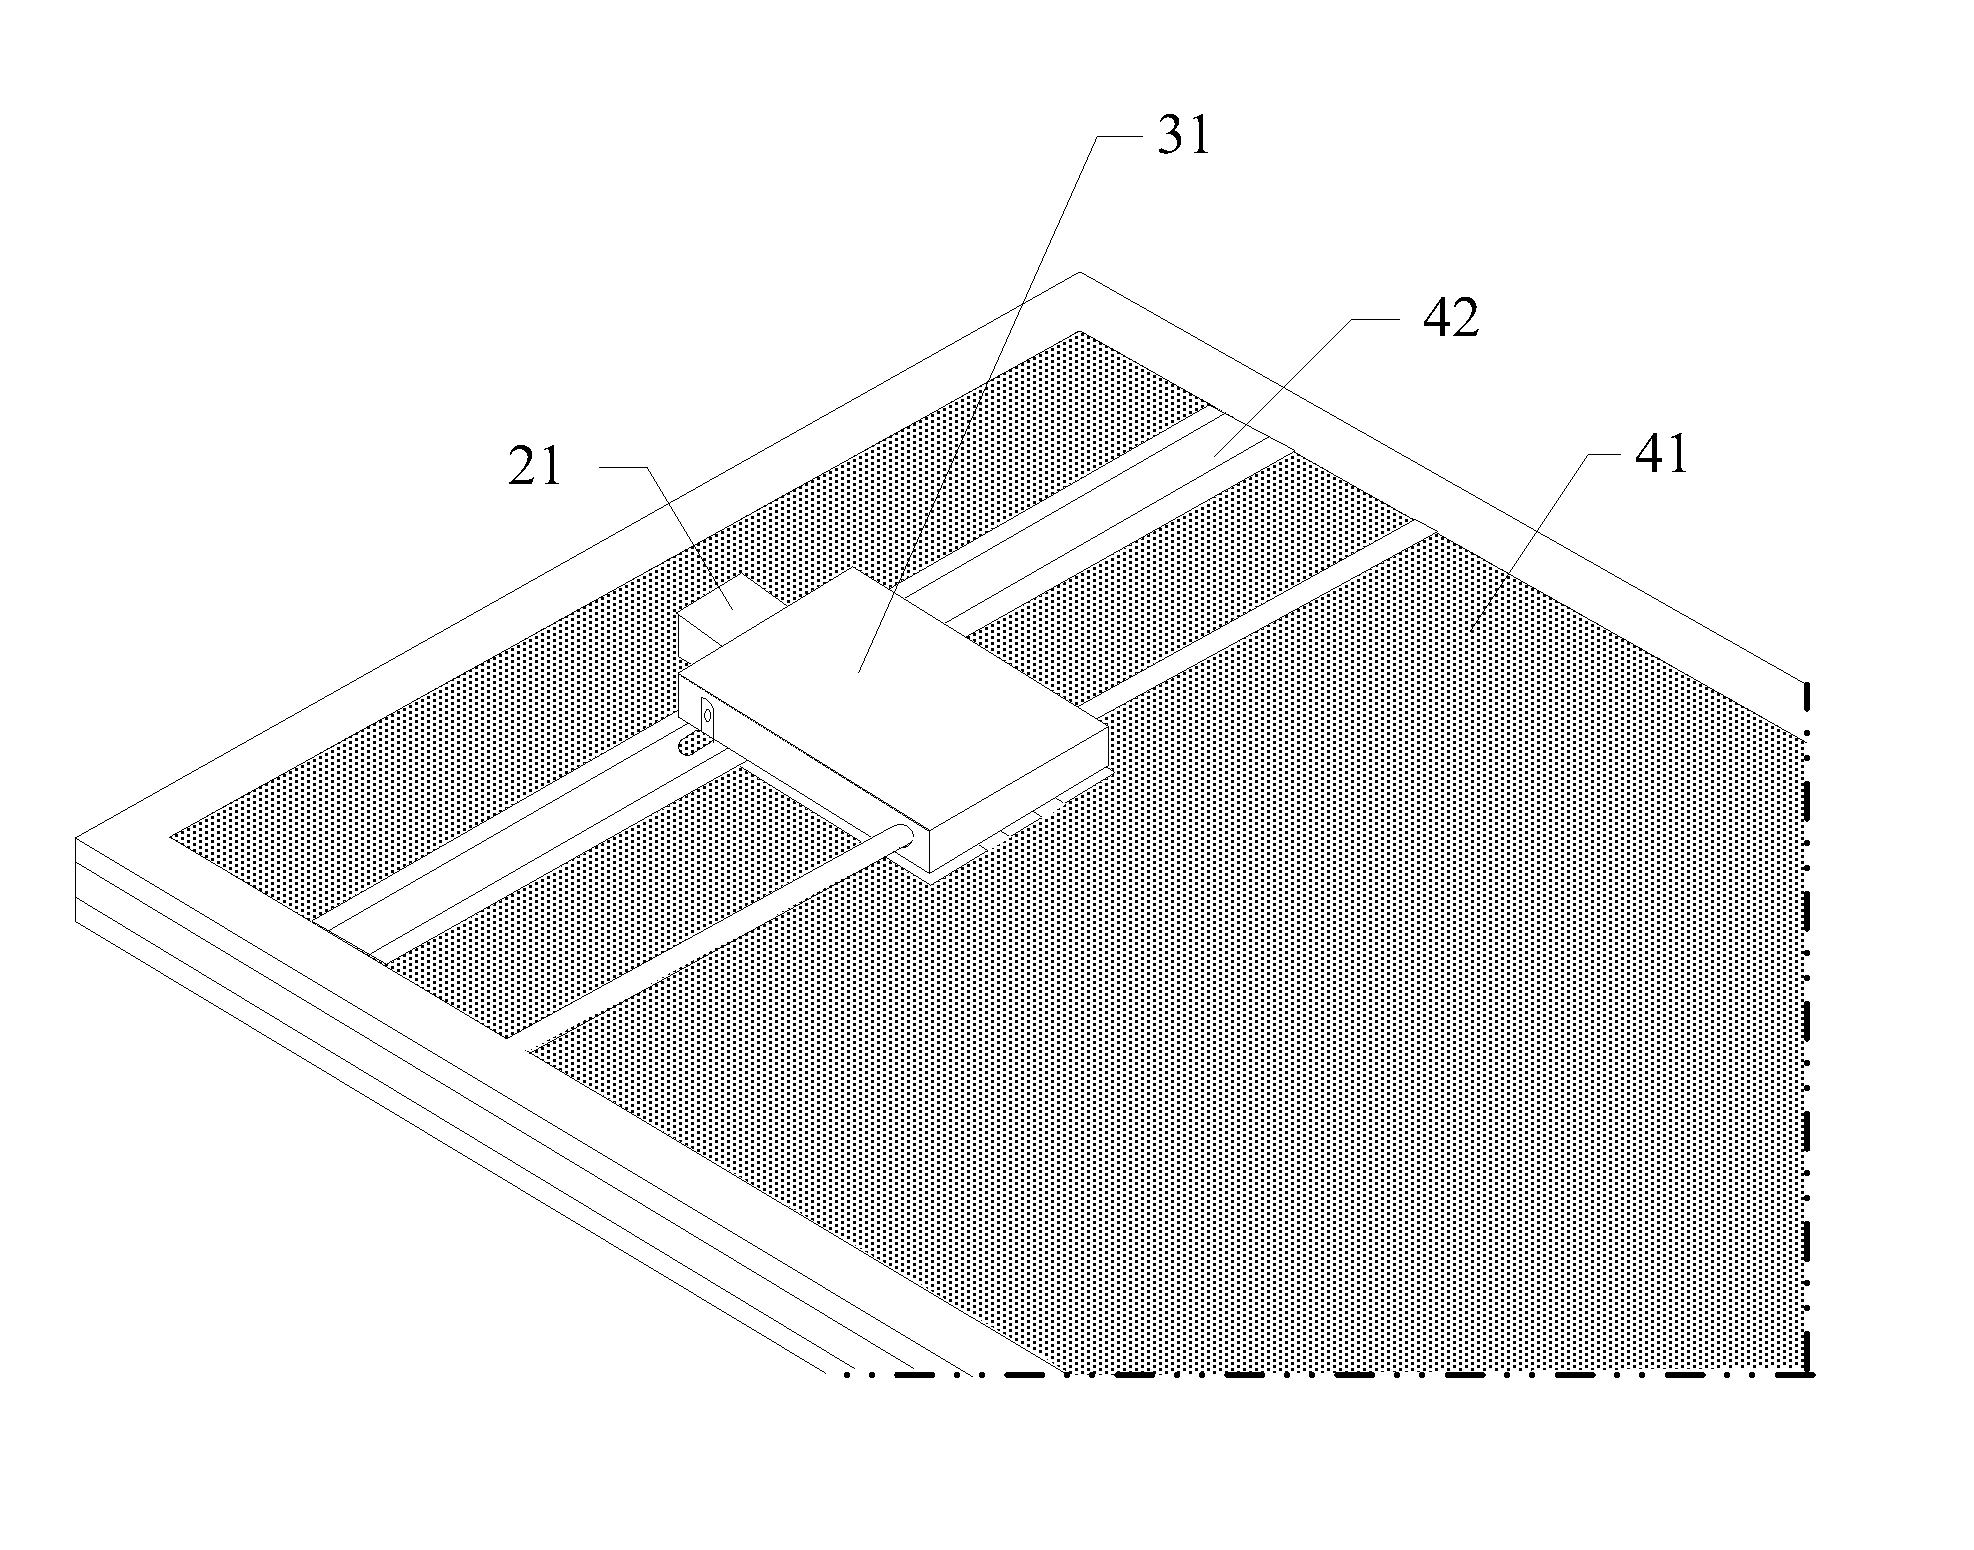 Photovoltaic System, a Terminal Box Thereof and a Voltage Converting Device